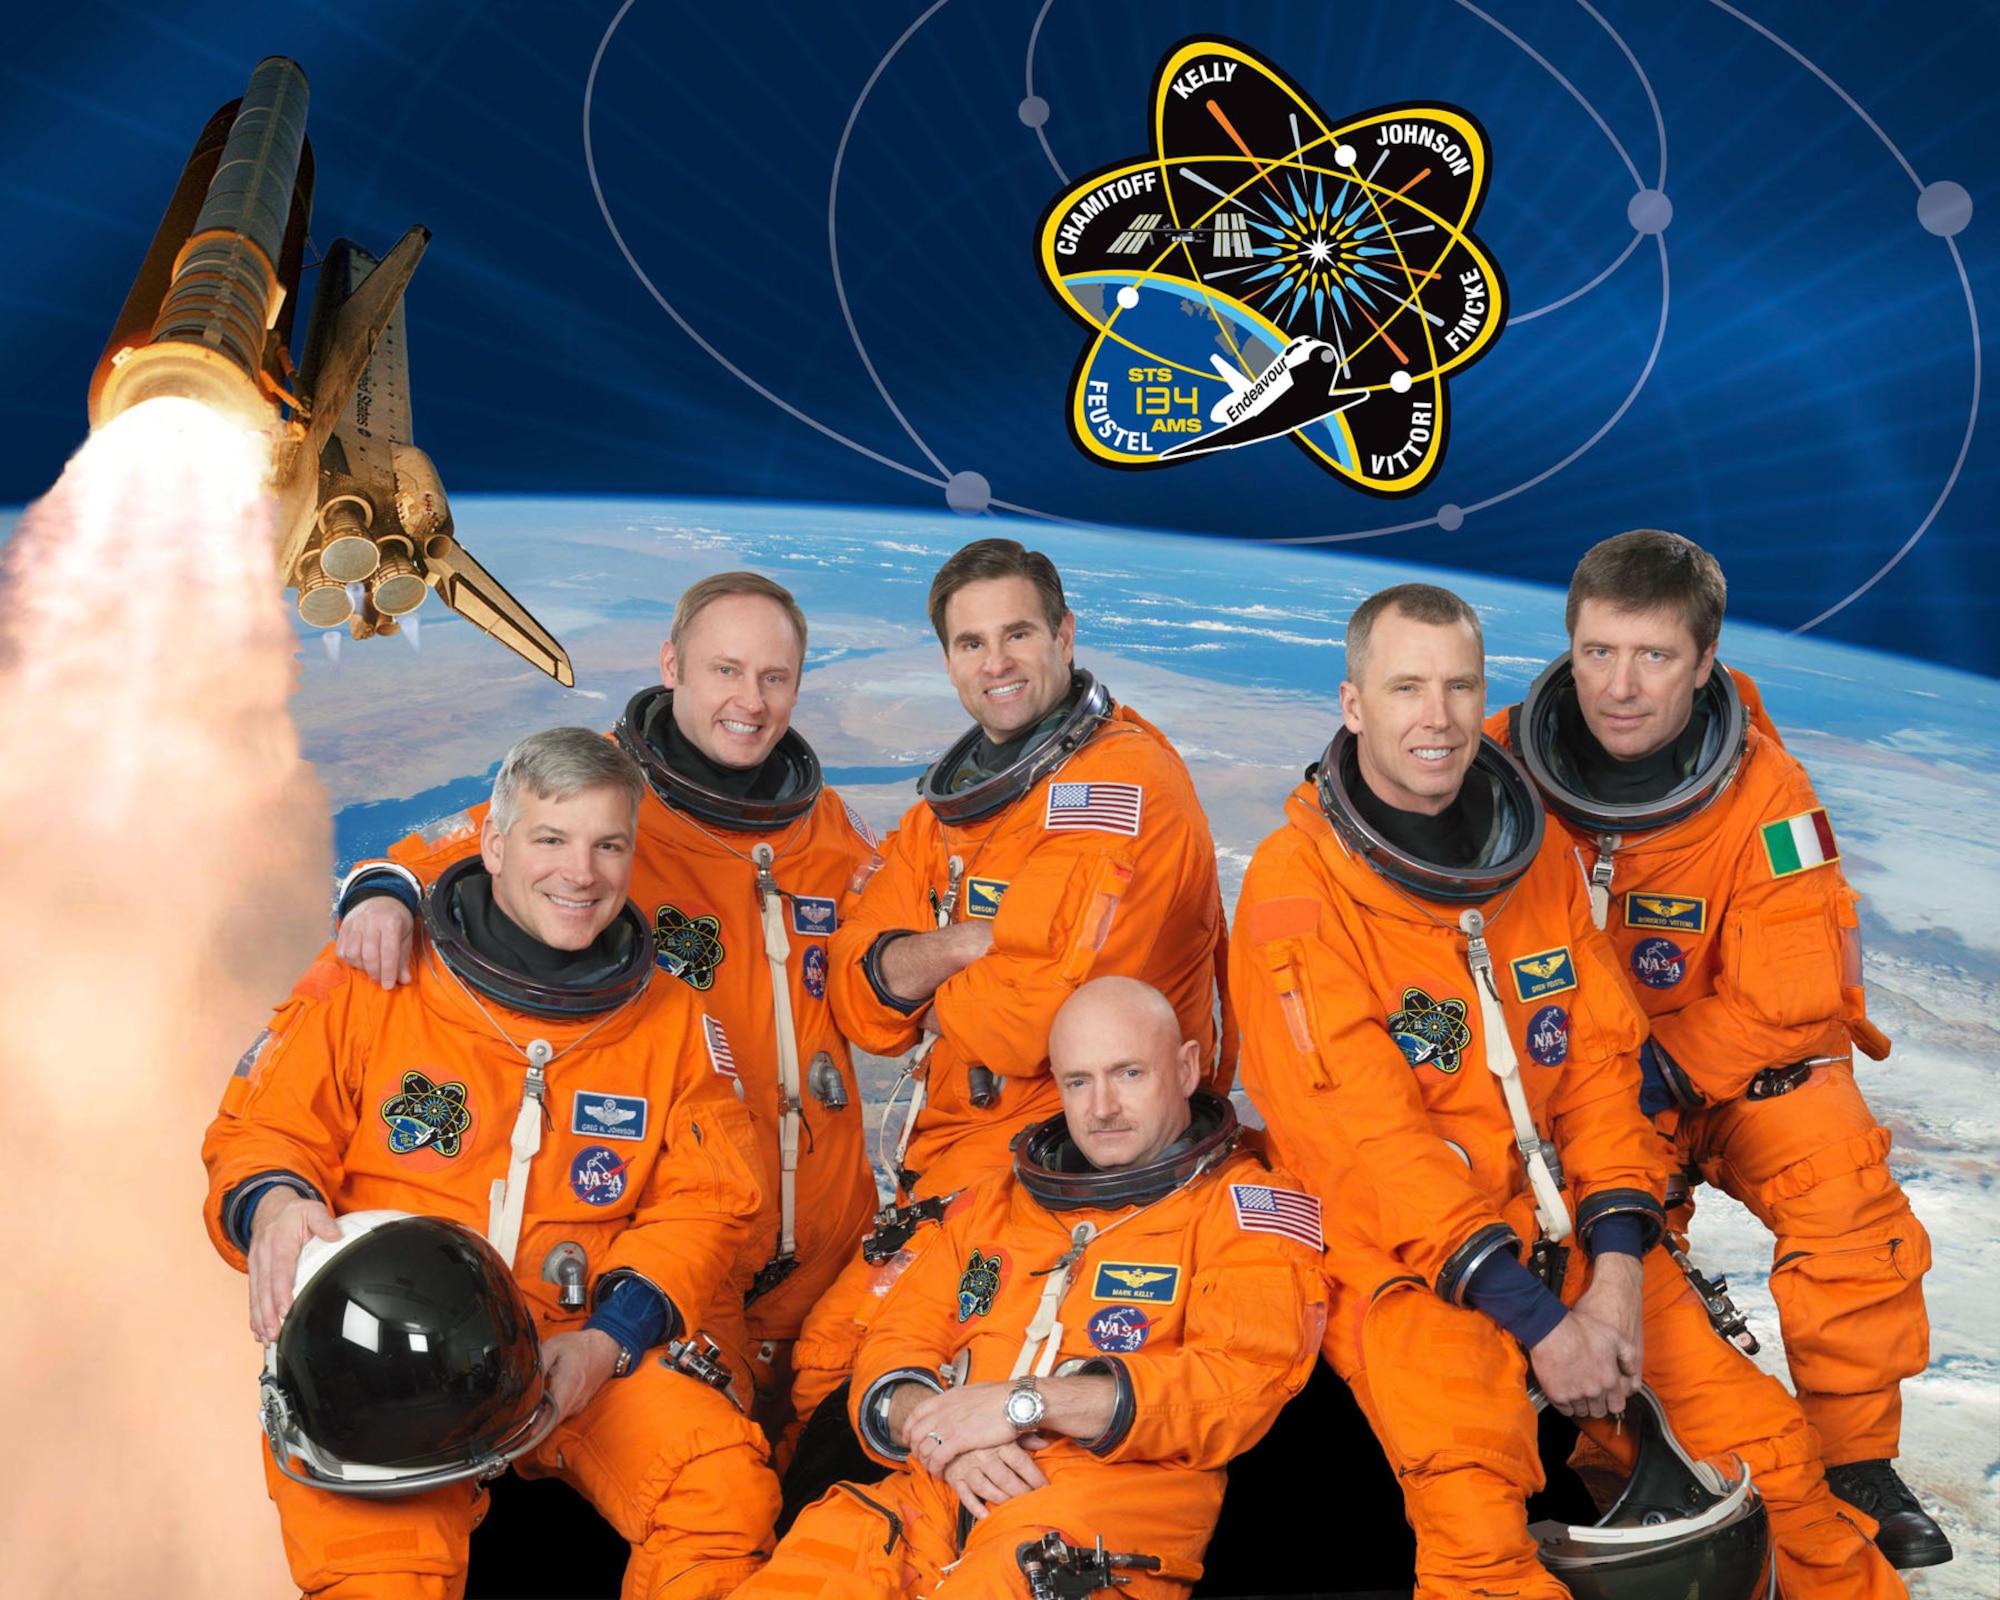 The crew of STS-134, Endeavour’s final mission. Pictured clockwise: NASA astronauts Mark Kelly (Capt., U.S. Navy, bottom center), commander; Gregory H. Johnson (Col., USAF, Ret.), pilot; Michael Fincke (Col., USAF), Greg Chamitoff, Andrew Feustel and the European Space Agency's Roberto Vittori, all mission specialists. (NASA image)